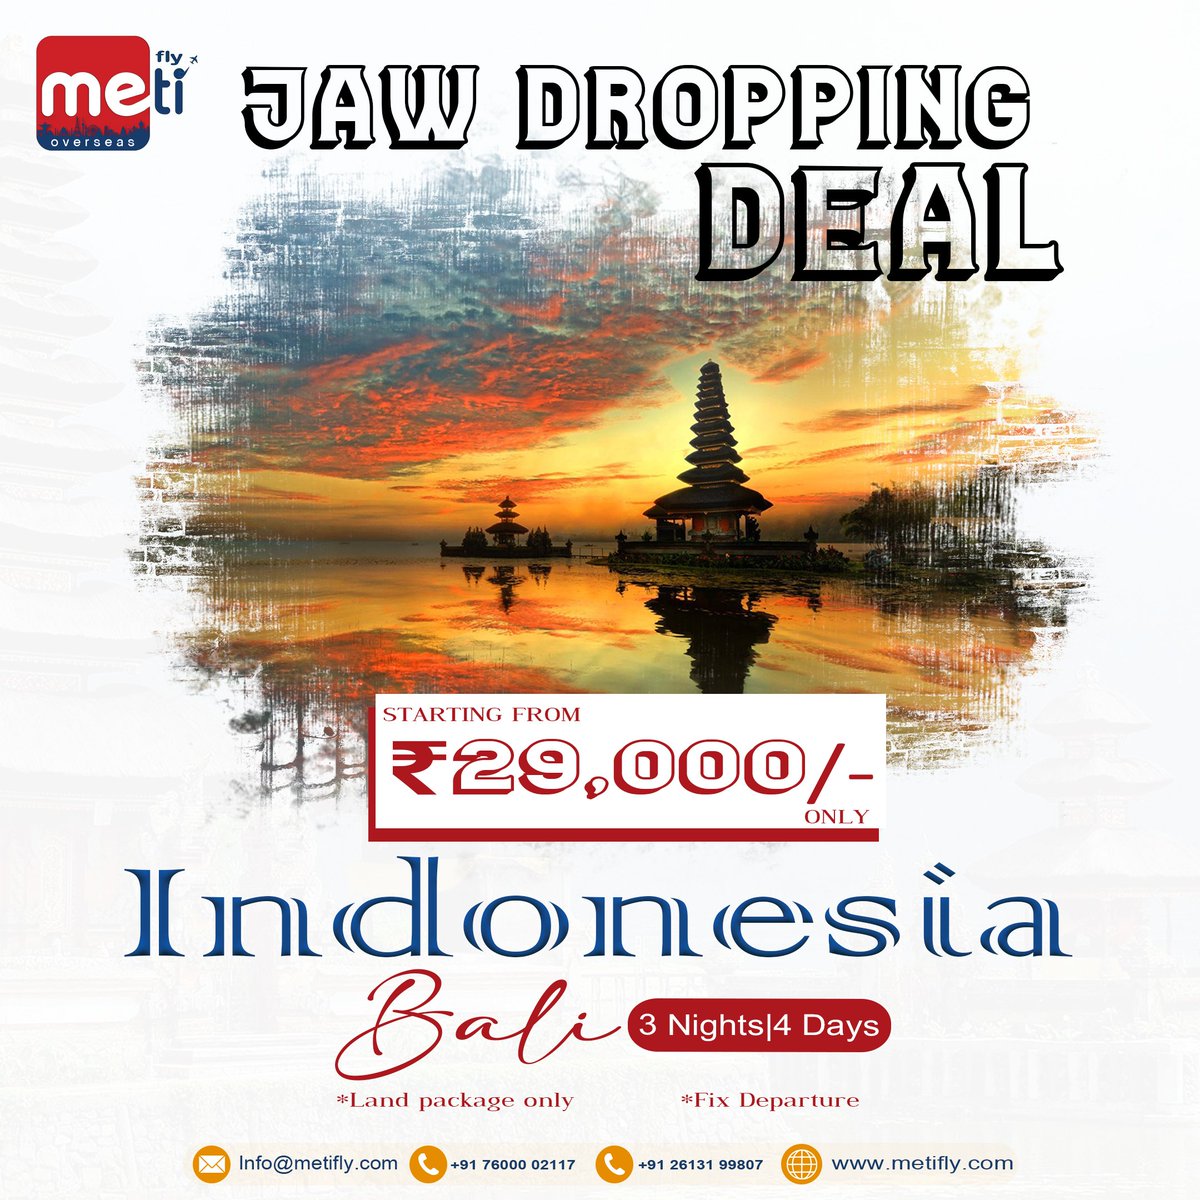 Wow Deal! 3 Nights-4Days in Bali, starting at ₹29,000/- with Metifly.

Call Us to Explore
+91 76000 02117. 

Follow Us...

_Facebook_

facebook.com/Metiflyy?mibex…

_Instagram_

instagram.com/metiflyy?igshi…
.
.
.
.
#unbelievabledeal #deal #palnyourtrip #bali #balitourism #metifly